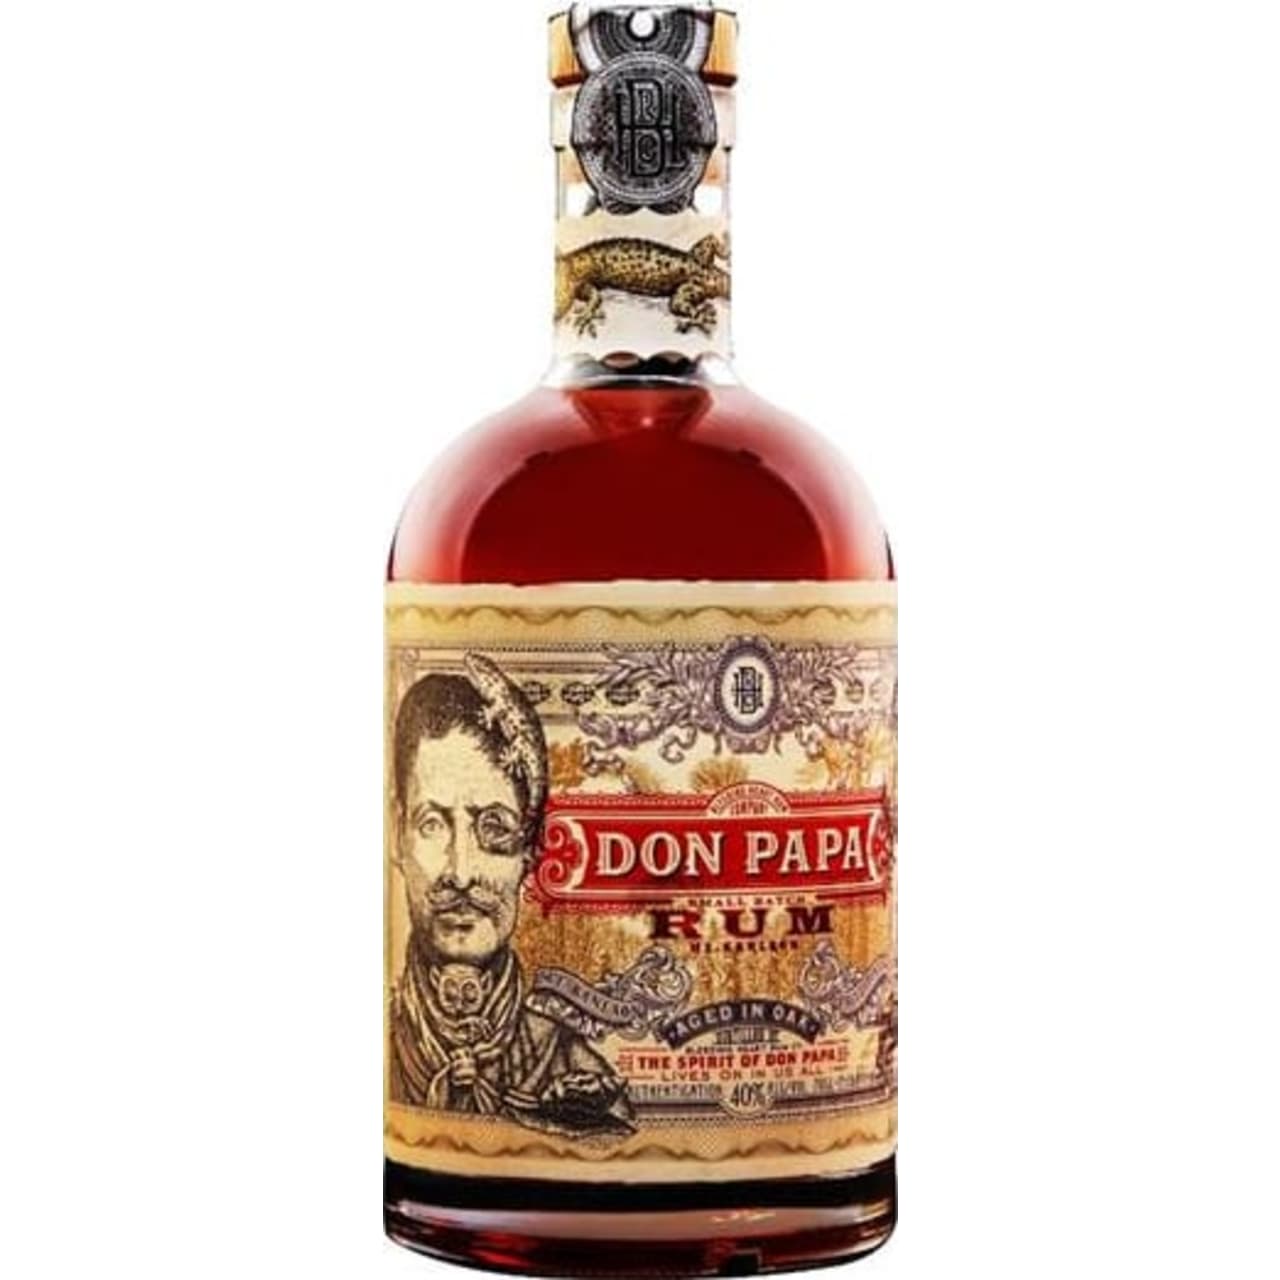 A premium aged, single-island rum from the Philippines, created on the foothills of the active volcano Mt. Kanlaon.